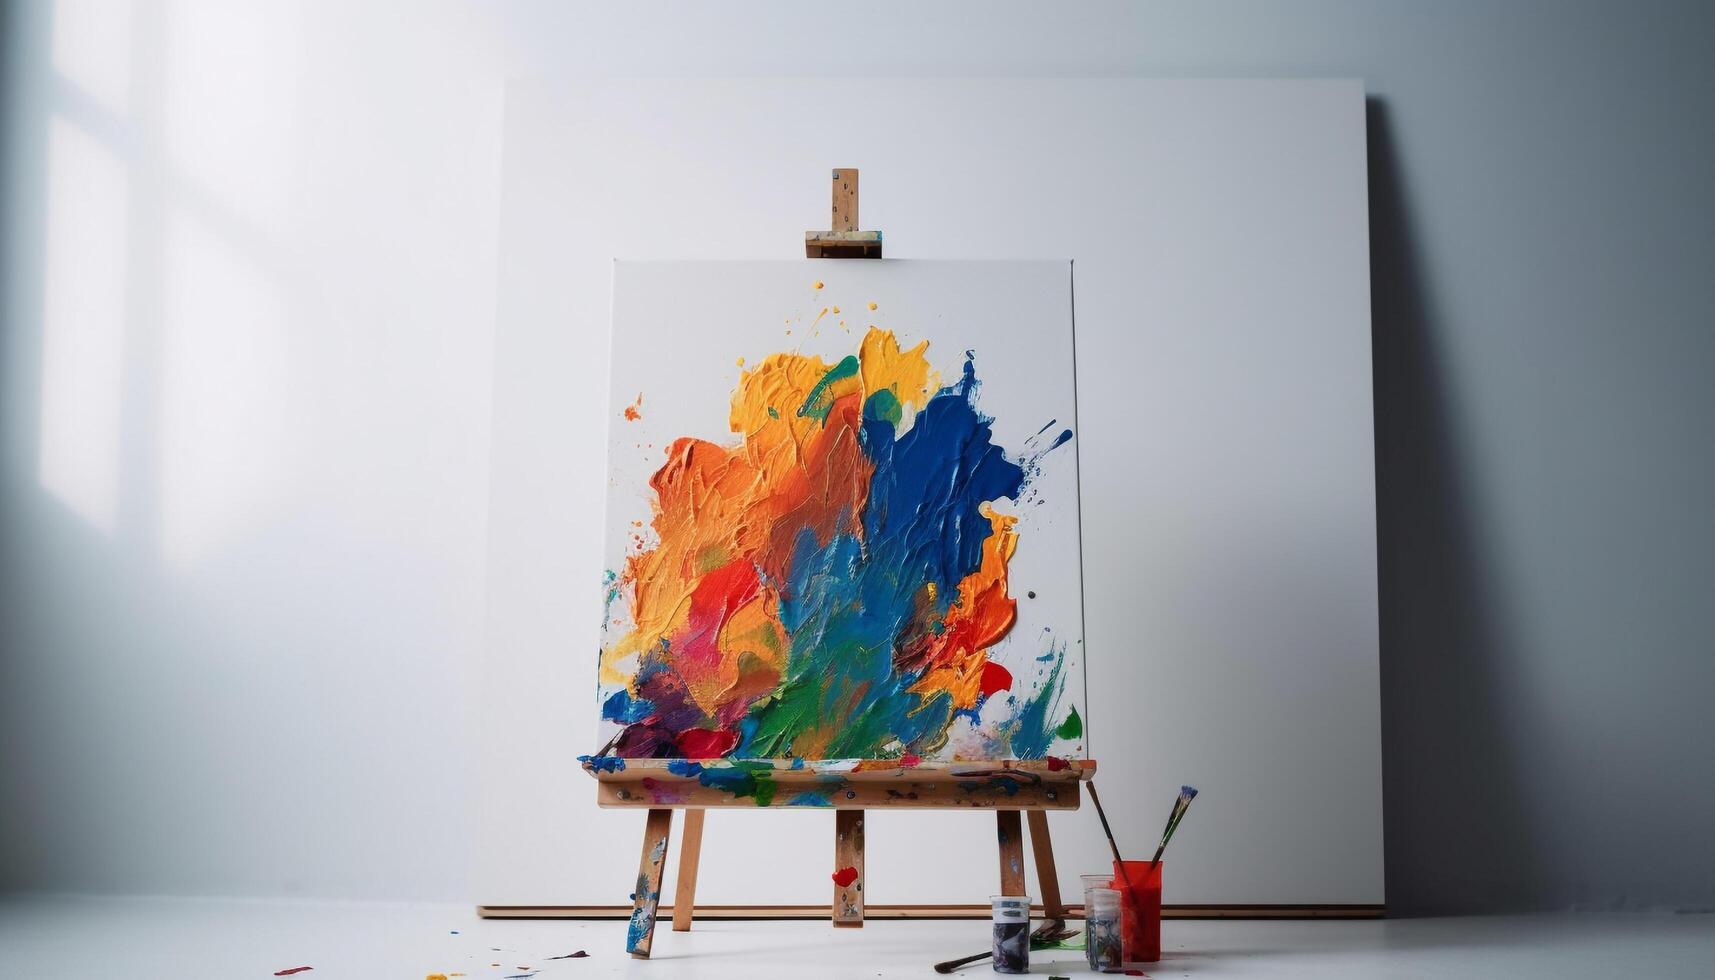 Vibrant colors on canvas, artist imagination flows generated by AI photo